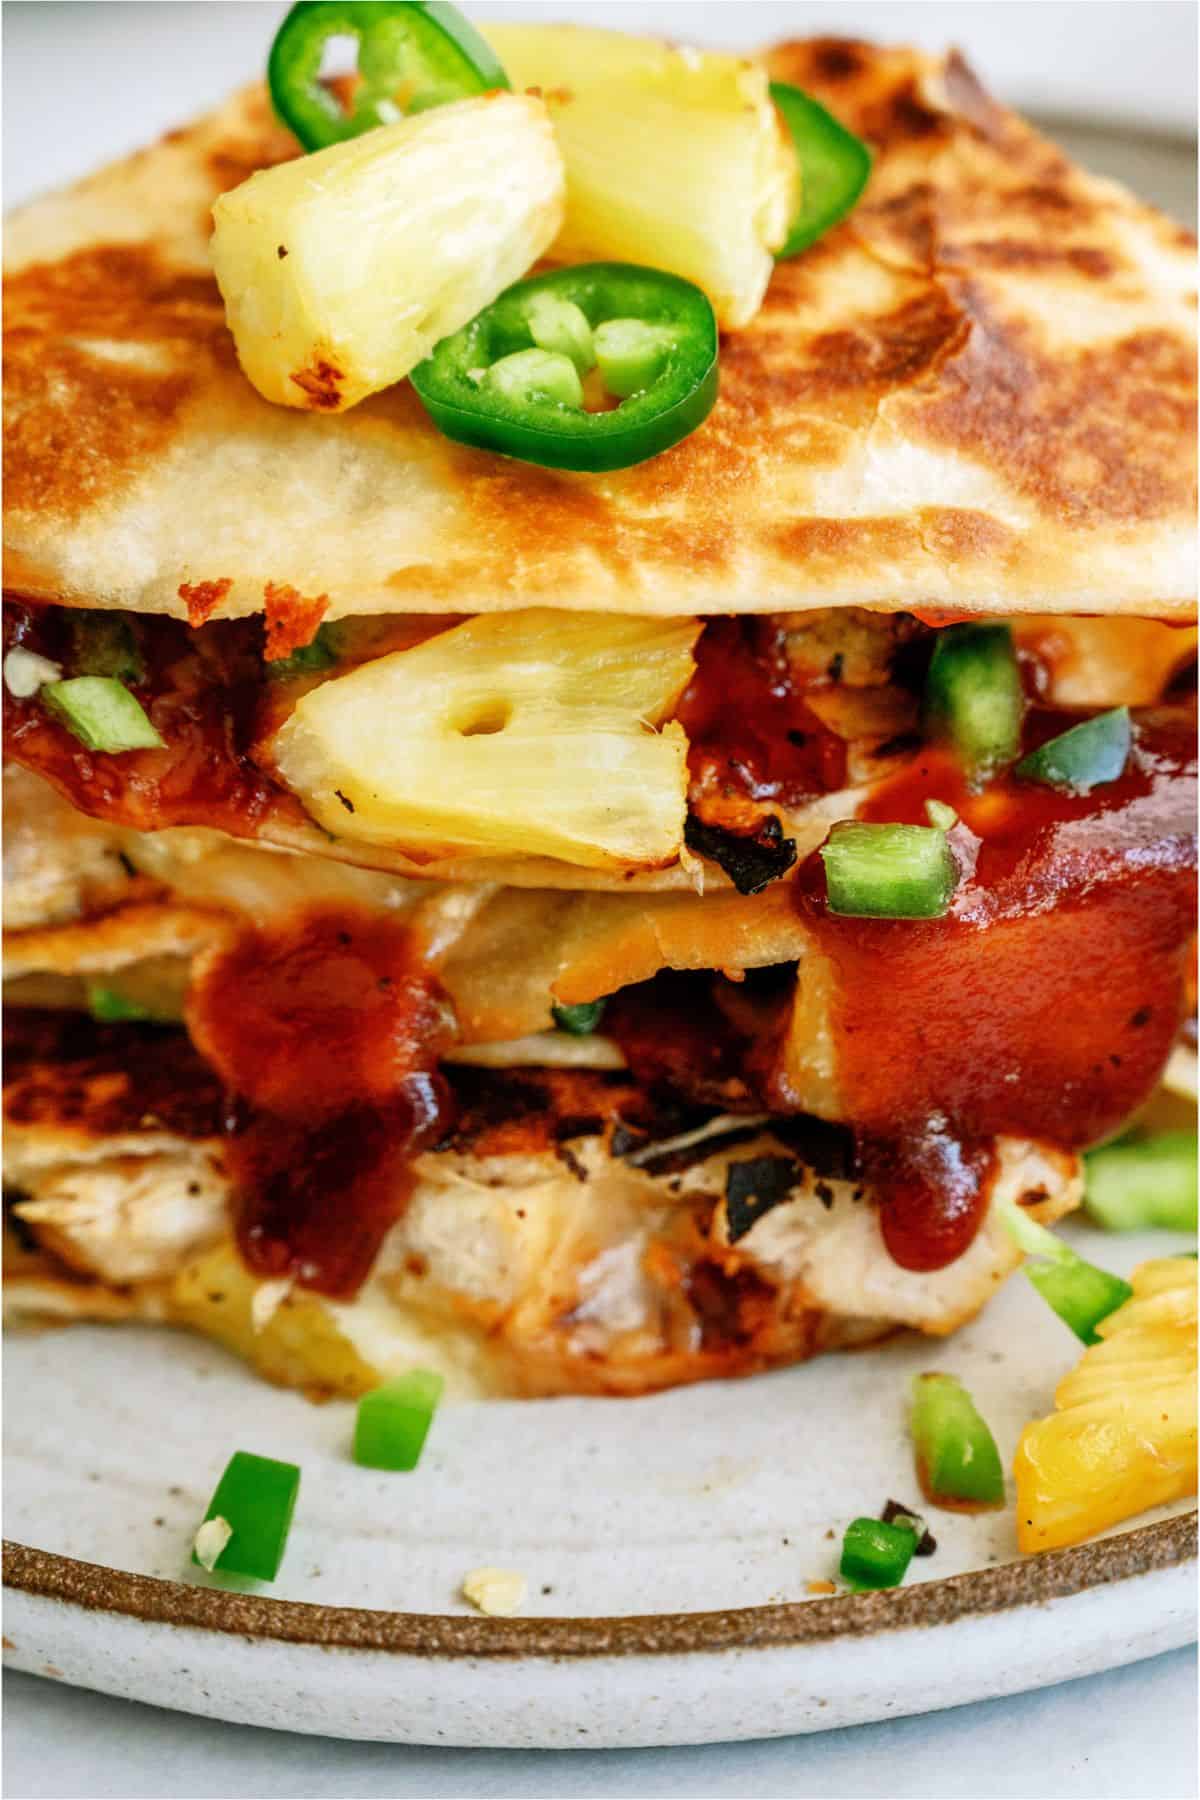 Close up view of sliced BBQ Chicken and Pineapple Quesadillas on a plate